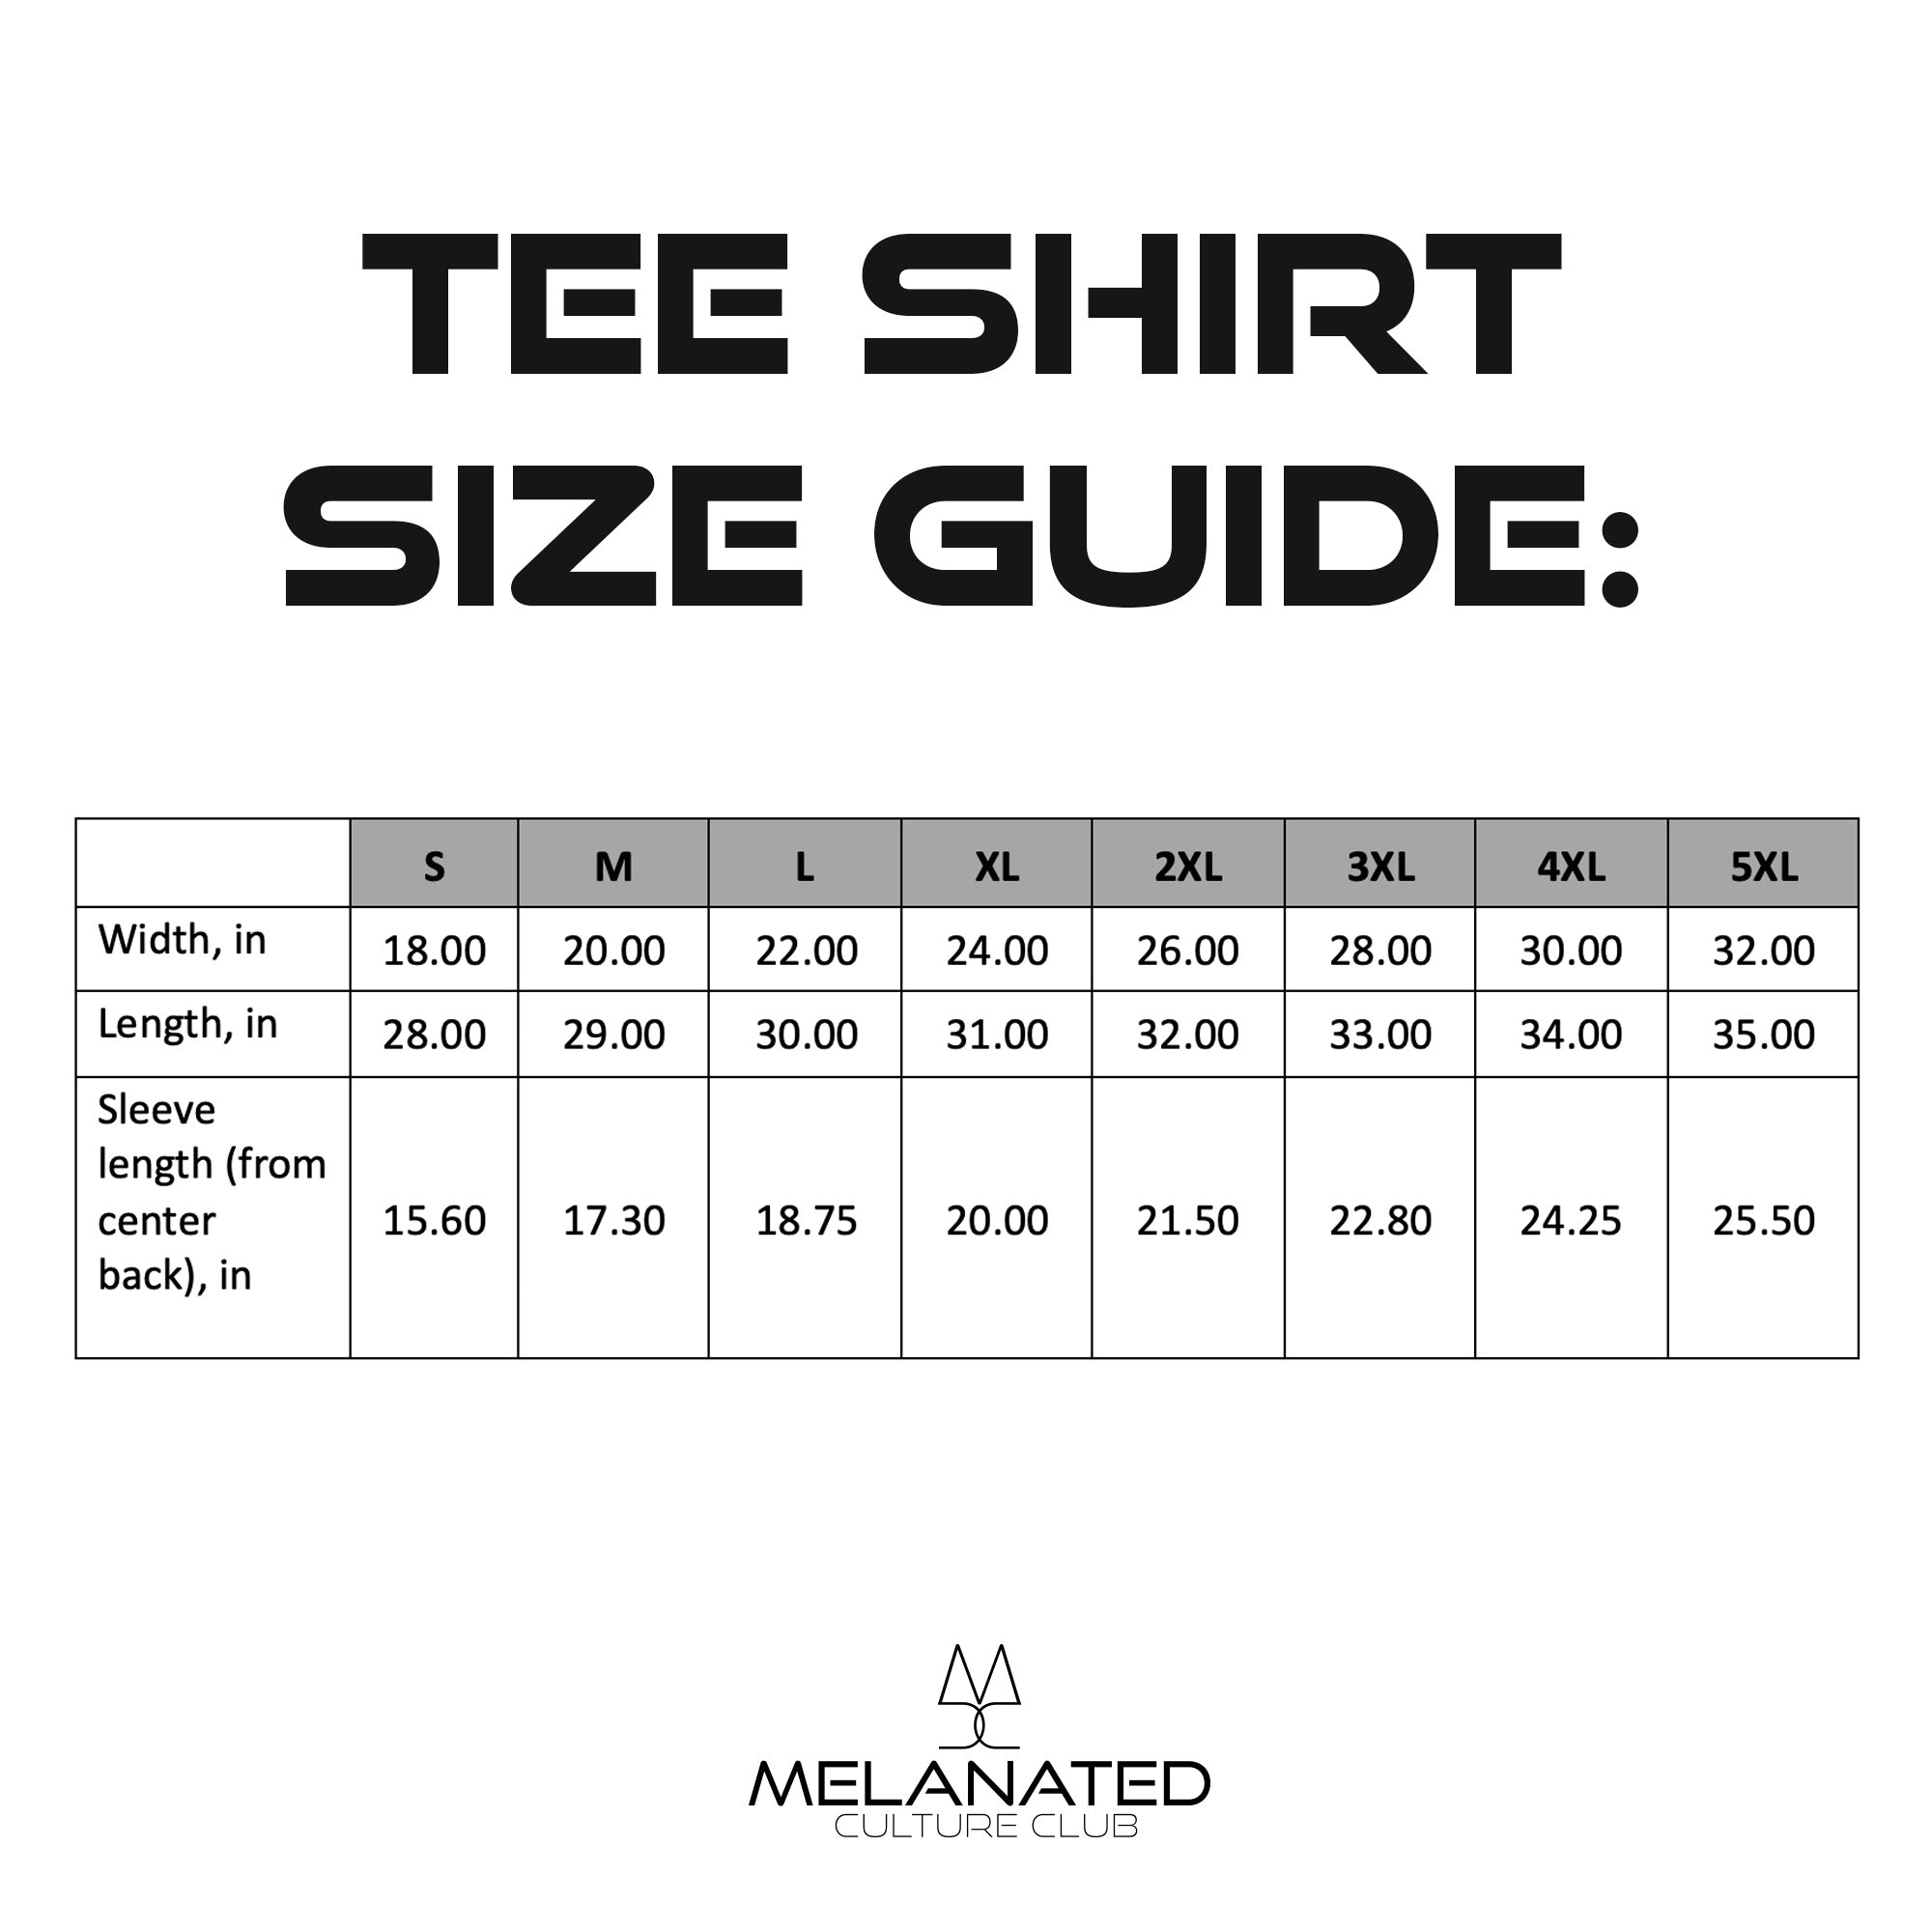 Tee shirt size guide for the abstract art tee shirt.